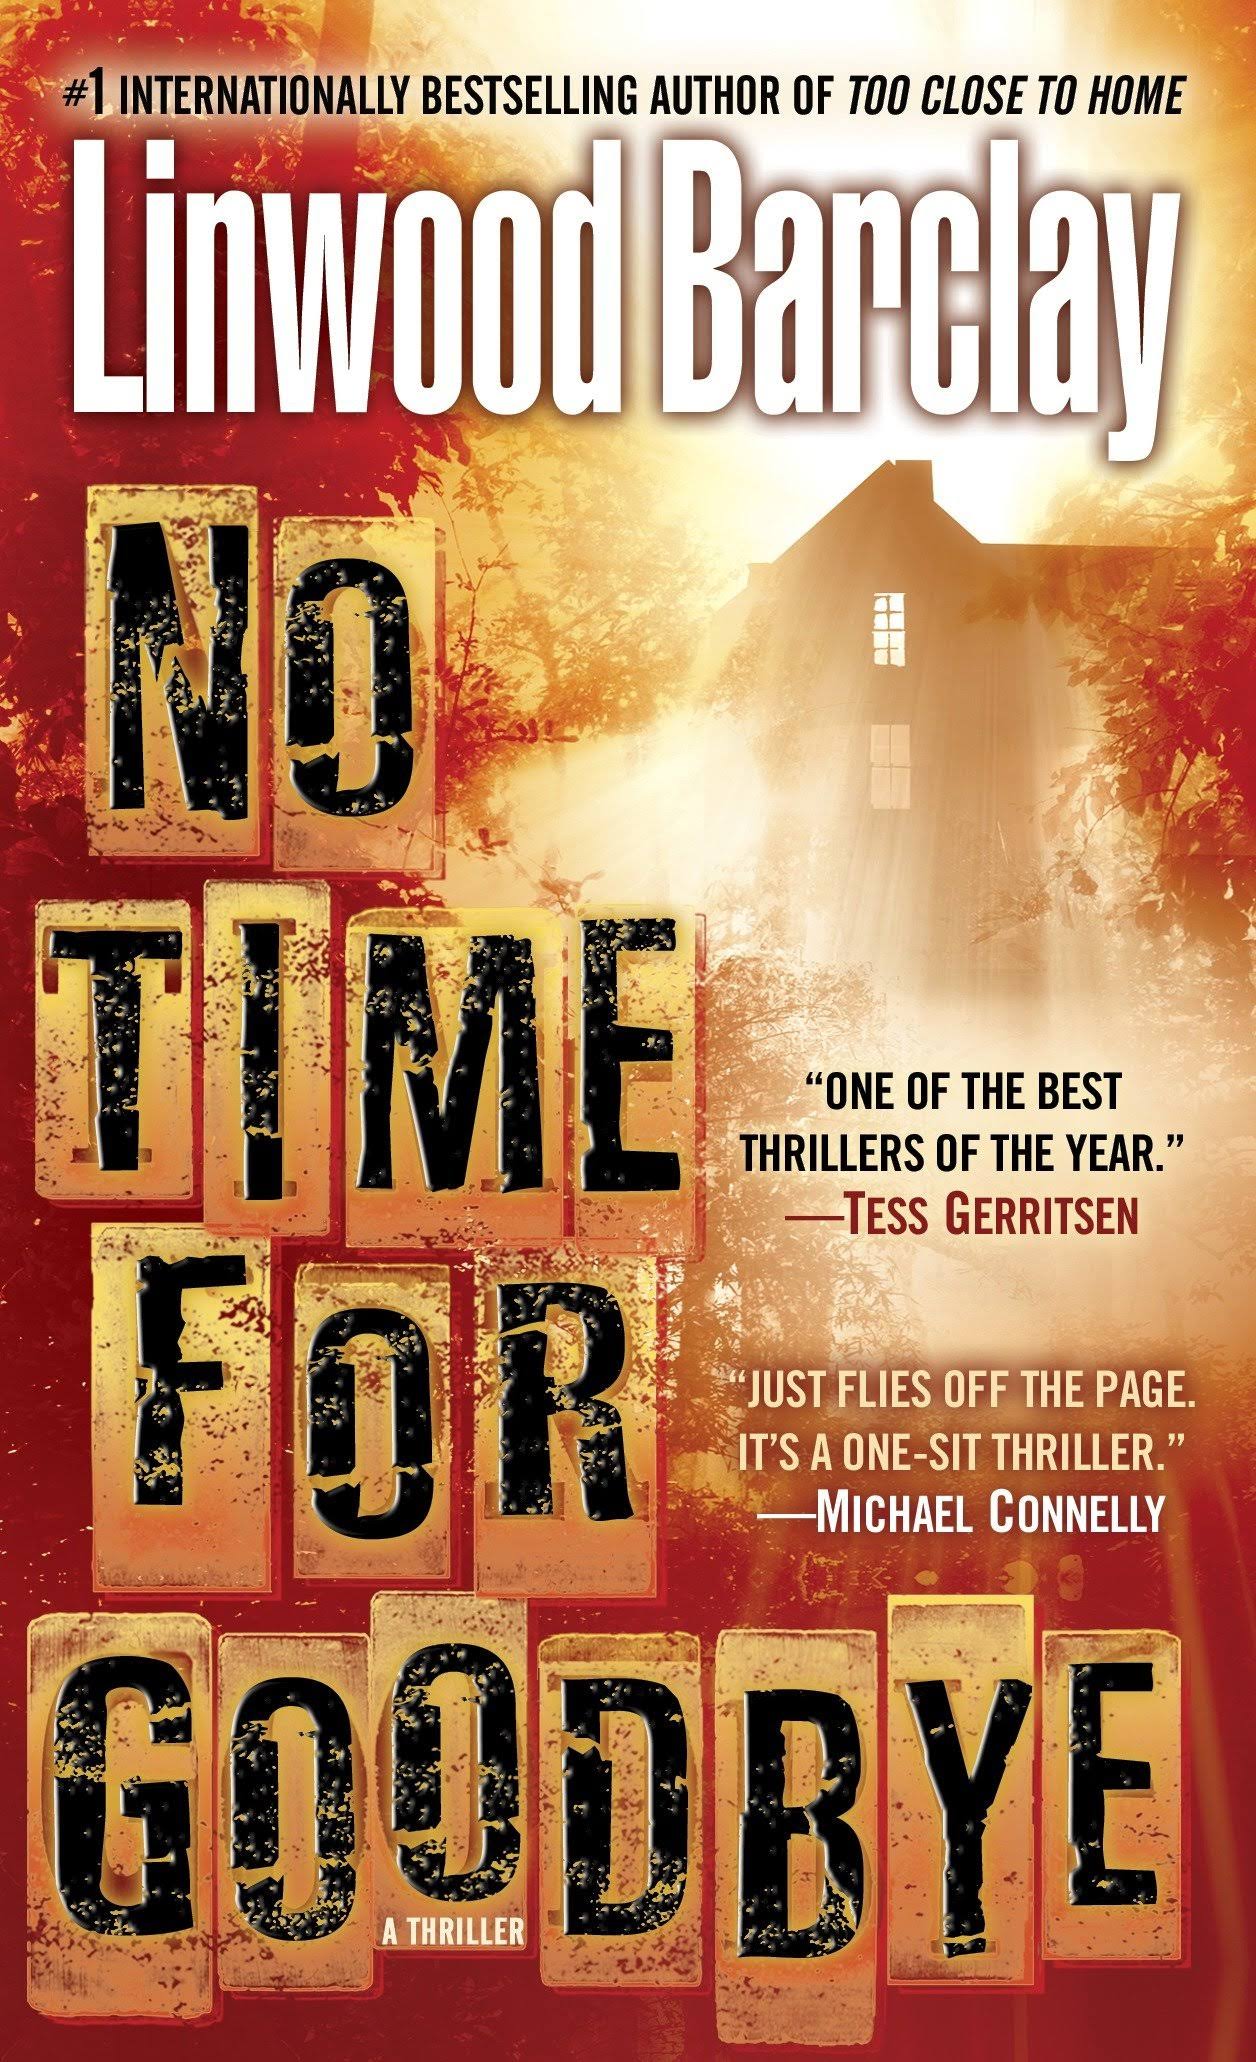 No Time for Goodbye [Book]